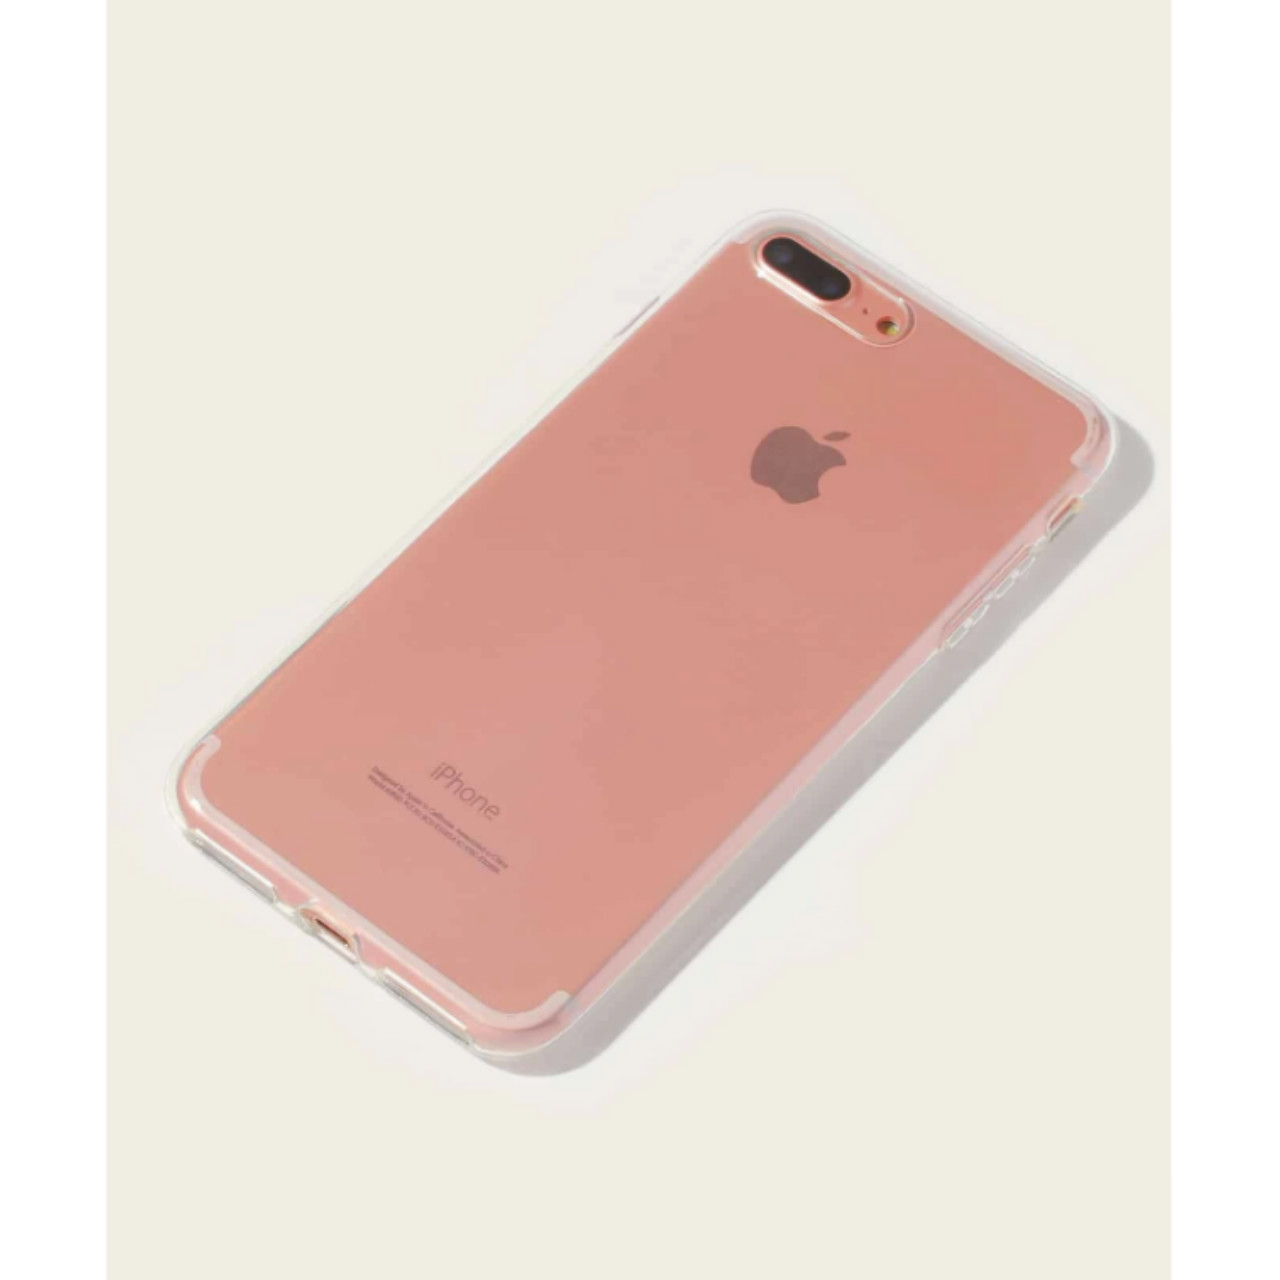 Clear simple iphone case 7p/8p